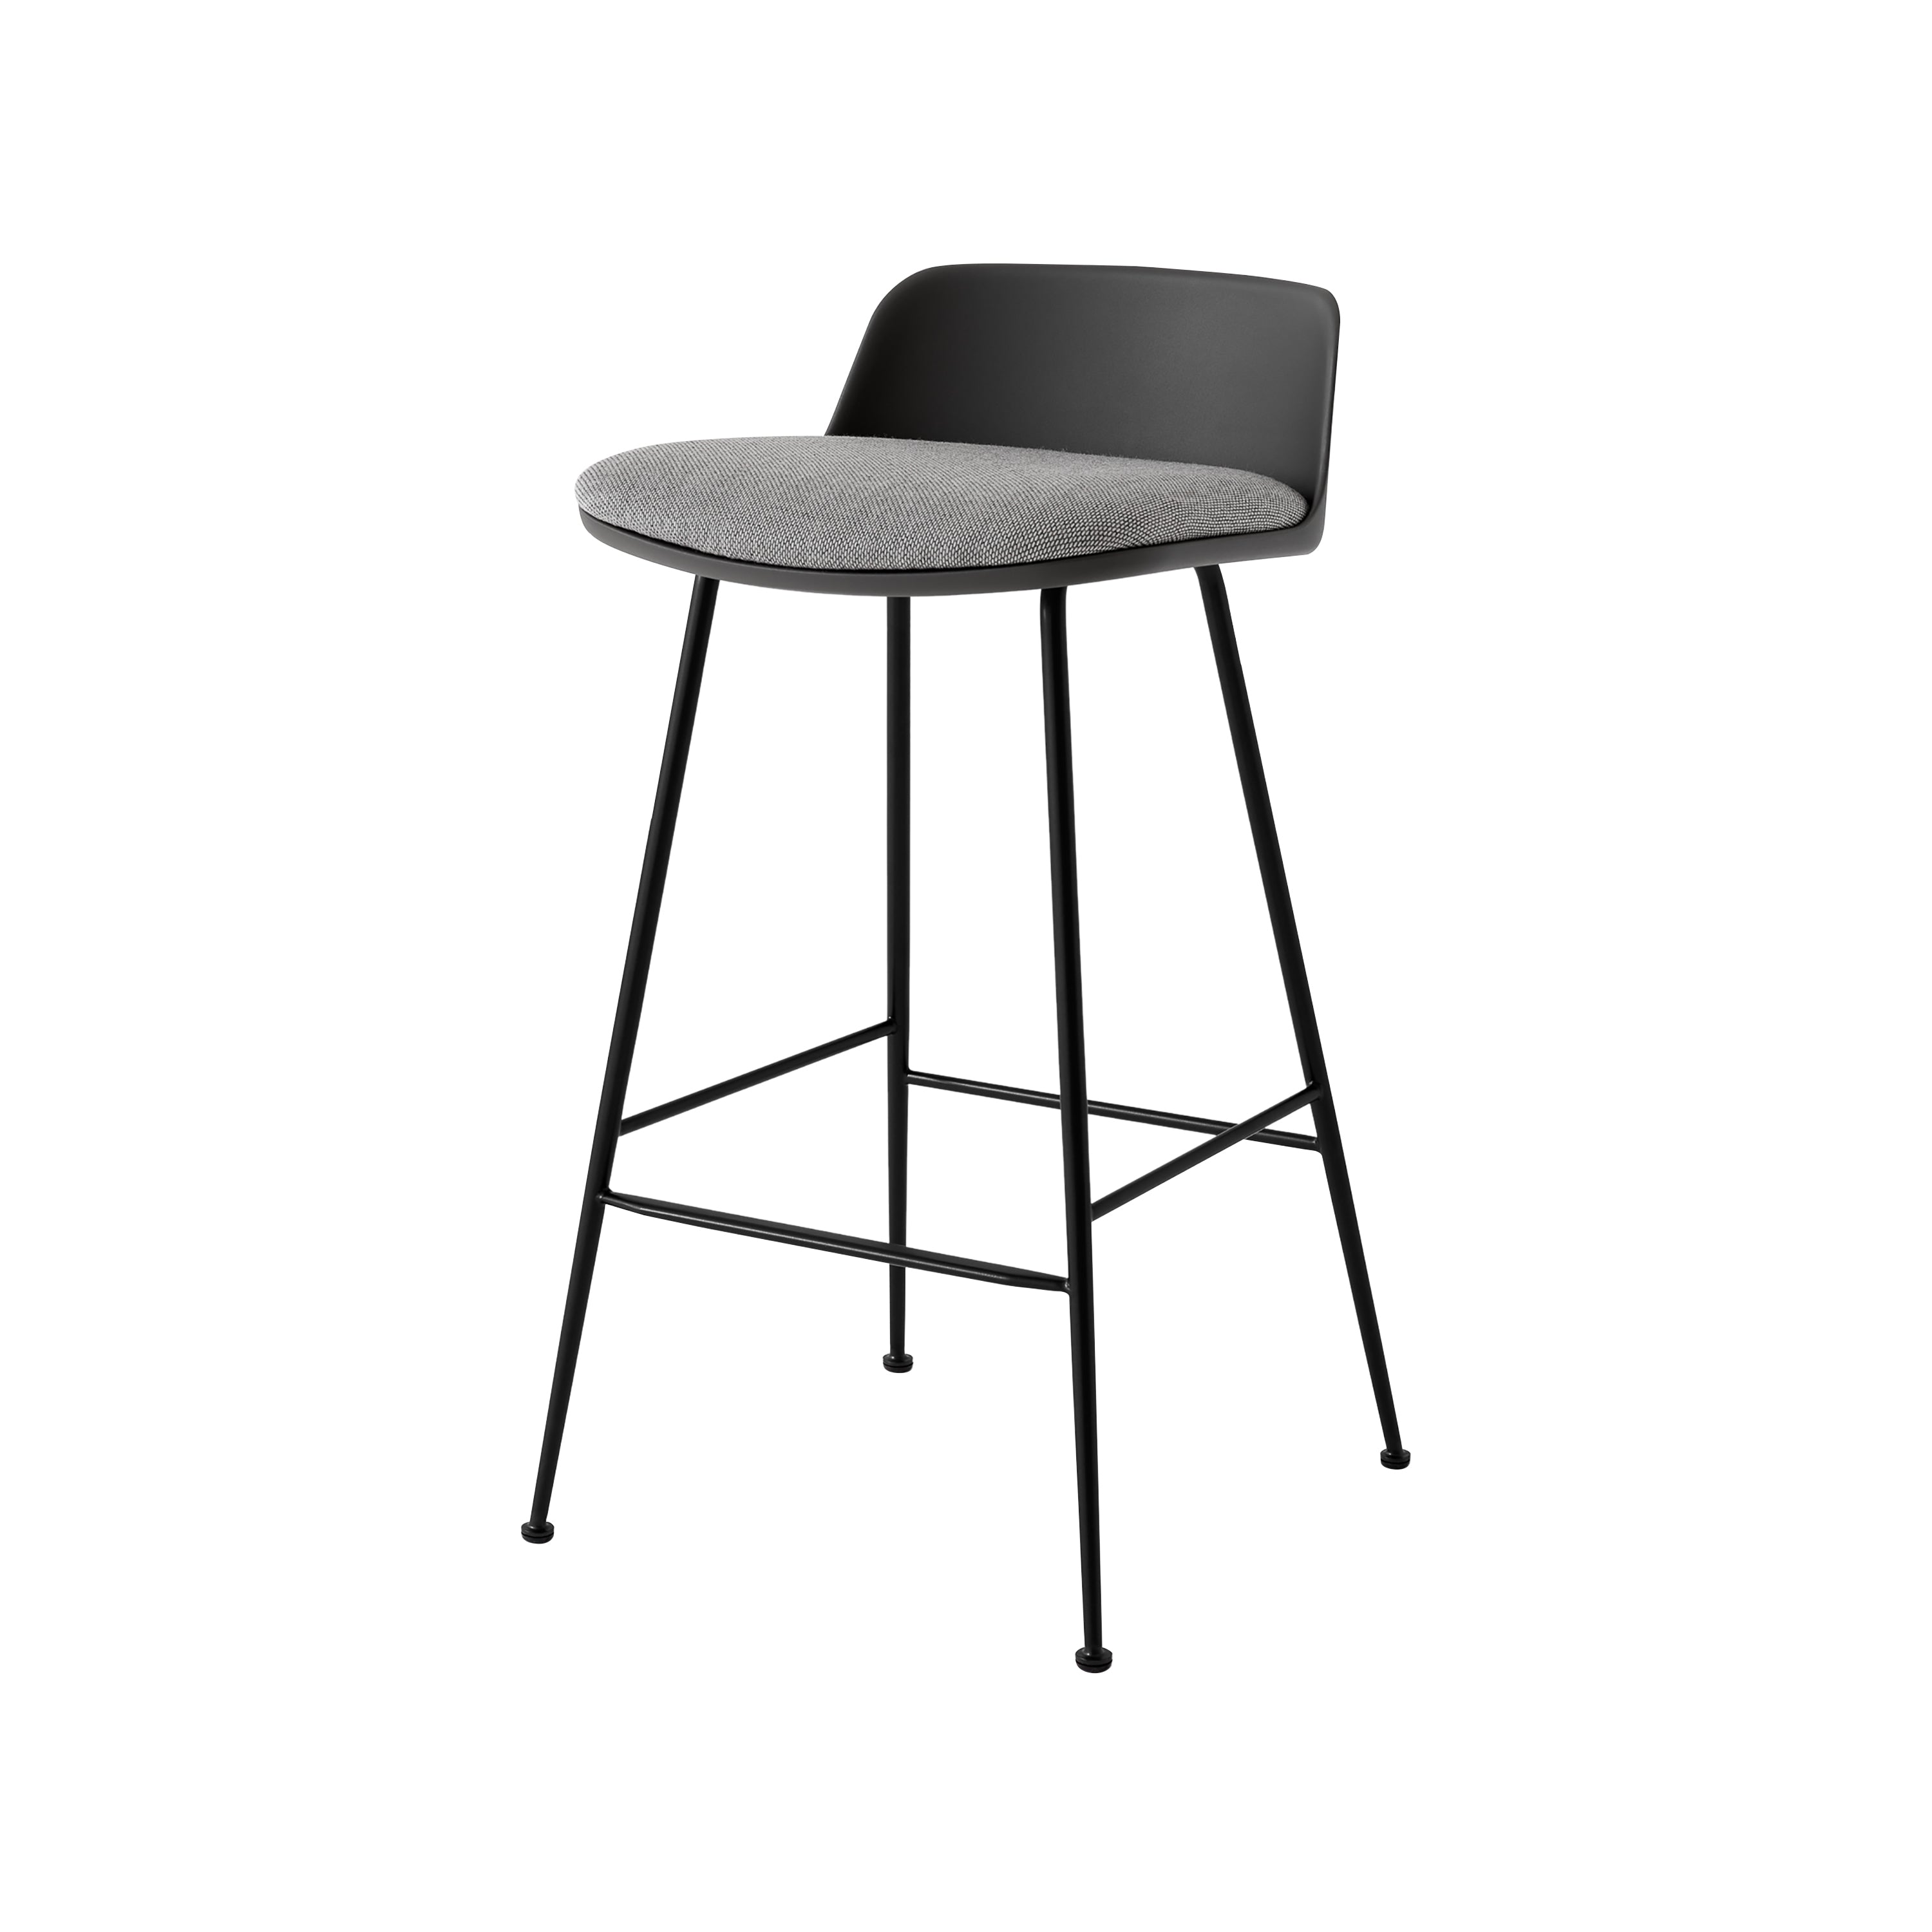 Rely Counter Stool: HW82 + Stone Grey + Black